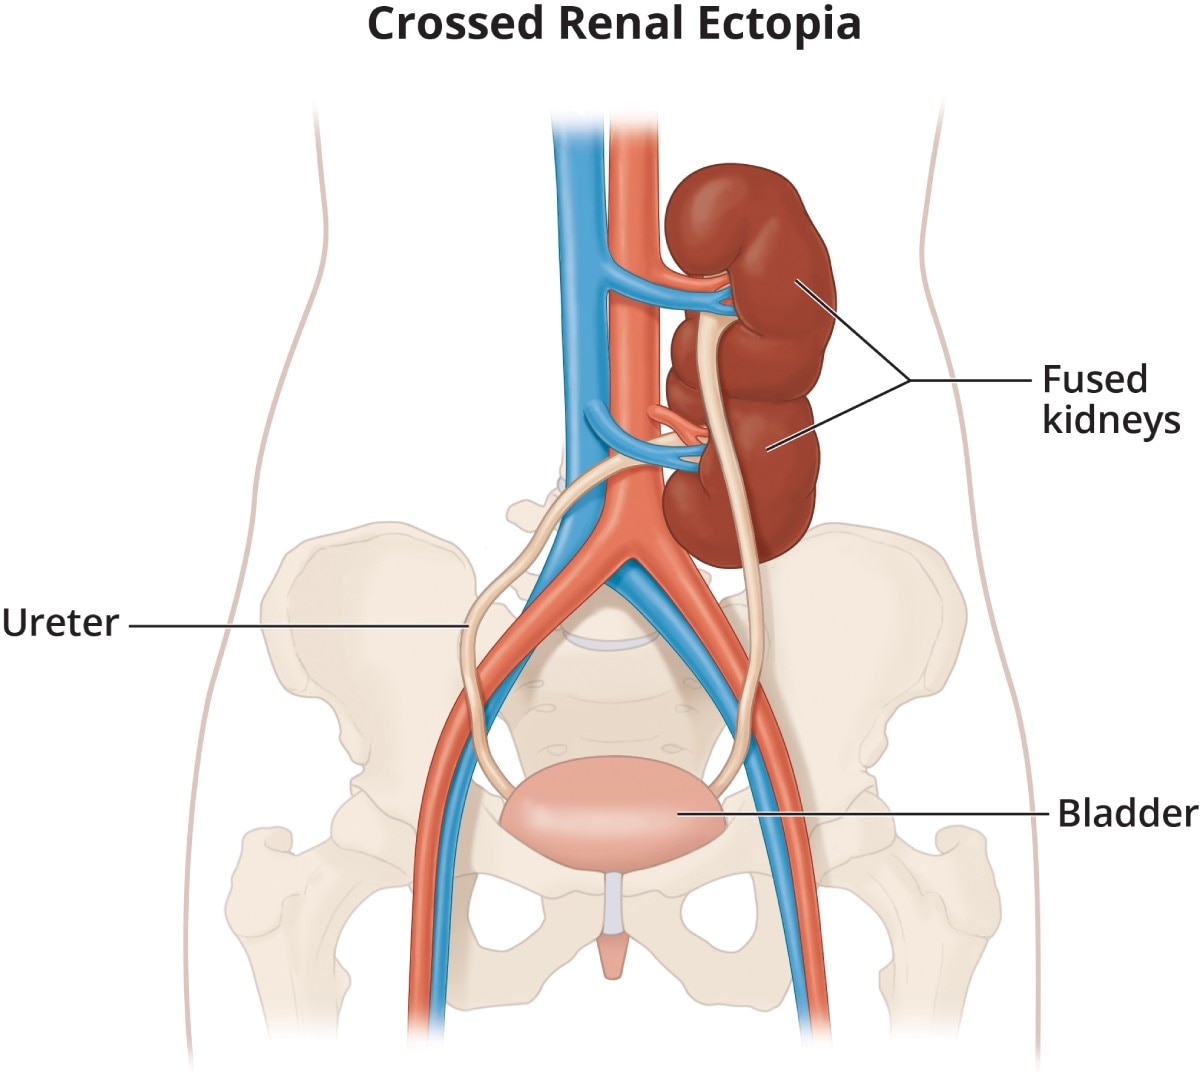 Crossed renal ectopia, which is two kidneys fused together on one side of the body.